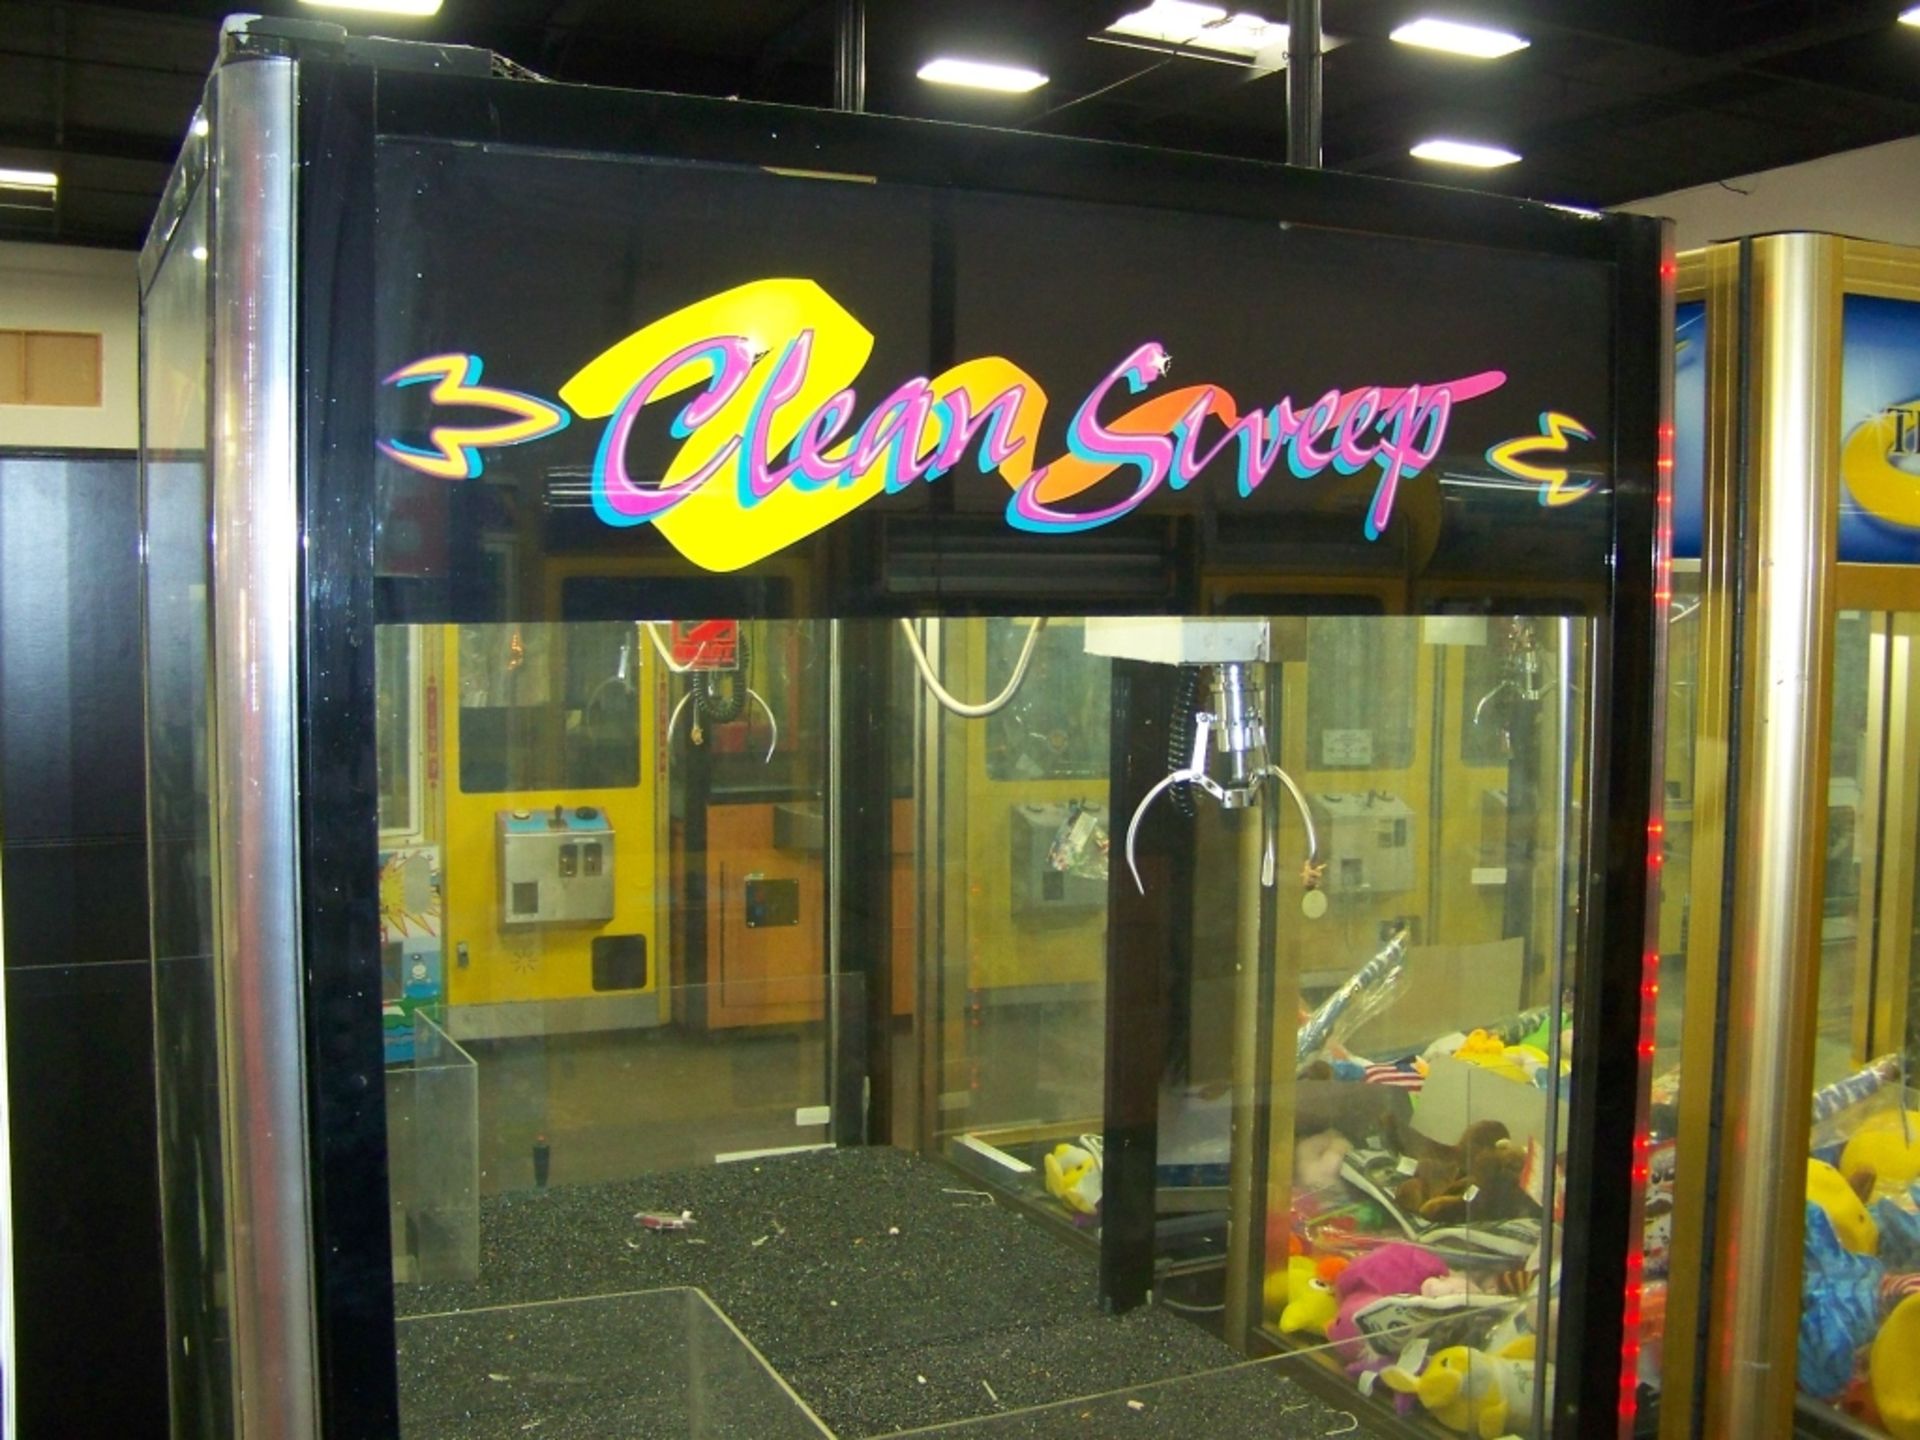 42" SMART CLEAN SWEEP JEWELRY CLAW CRANE MACHINE A - Image 3 of 3